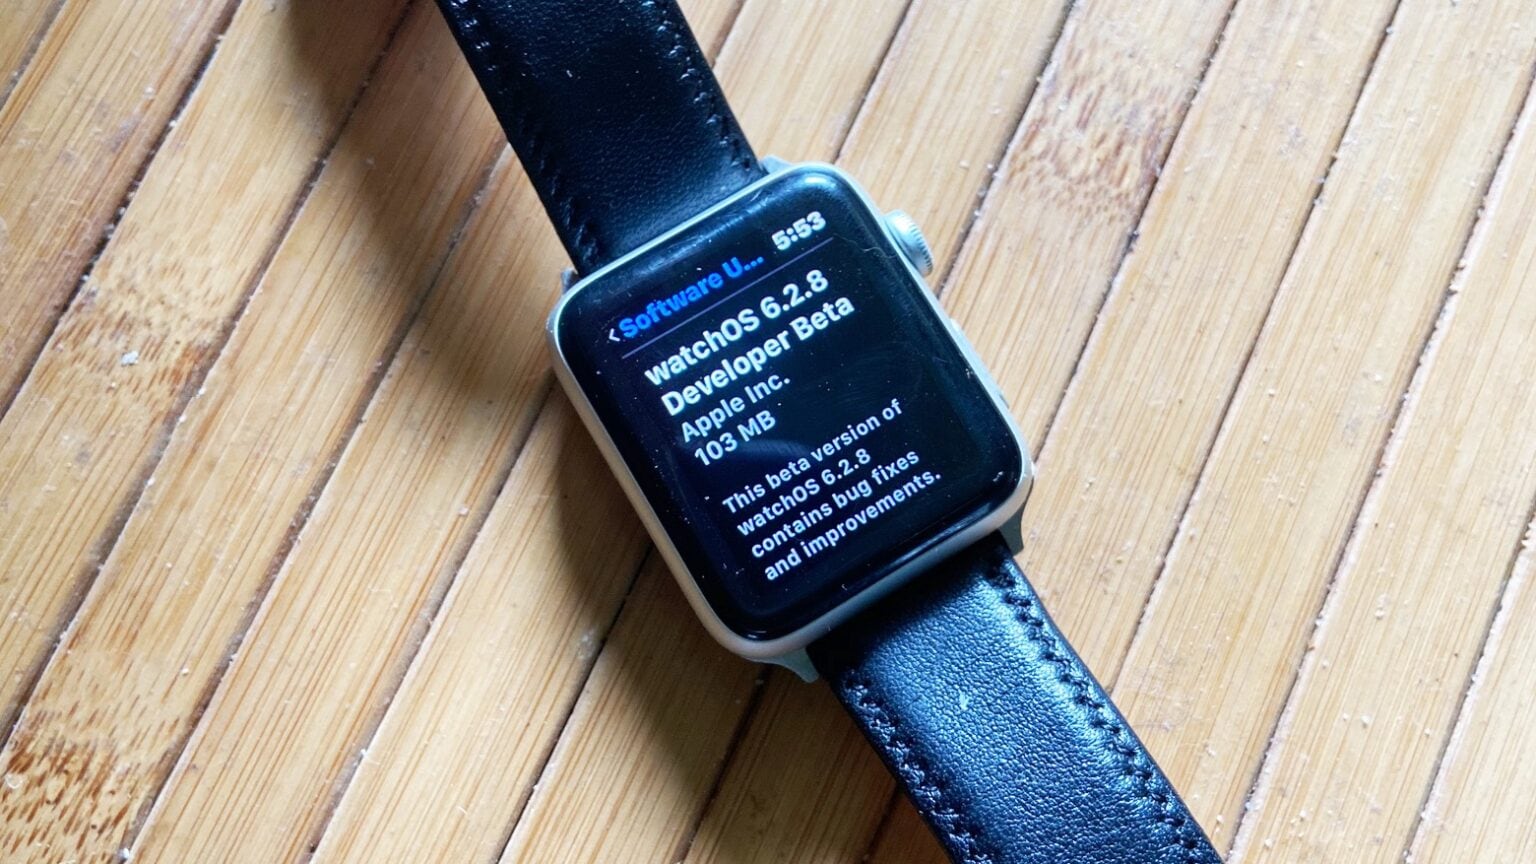 watchOS 6.2.8 beta is out